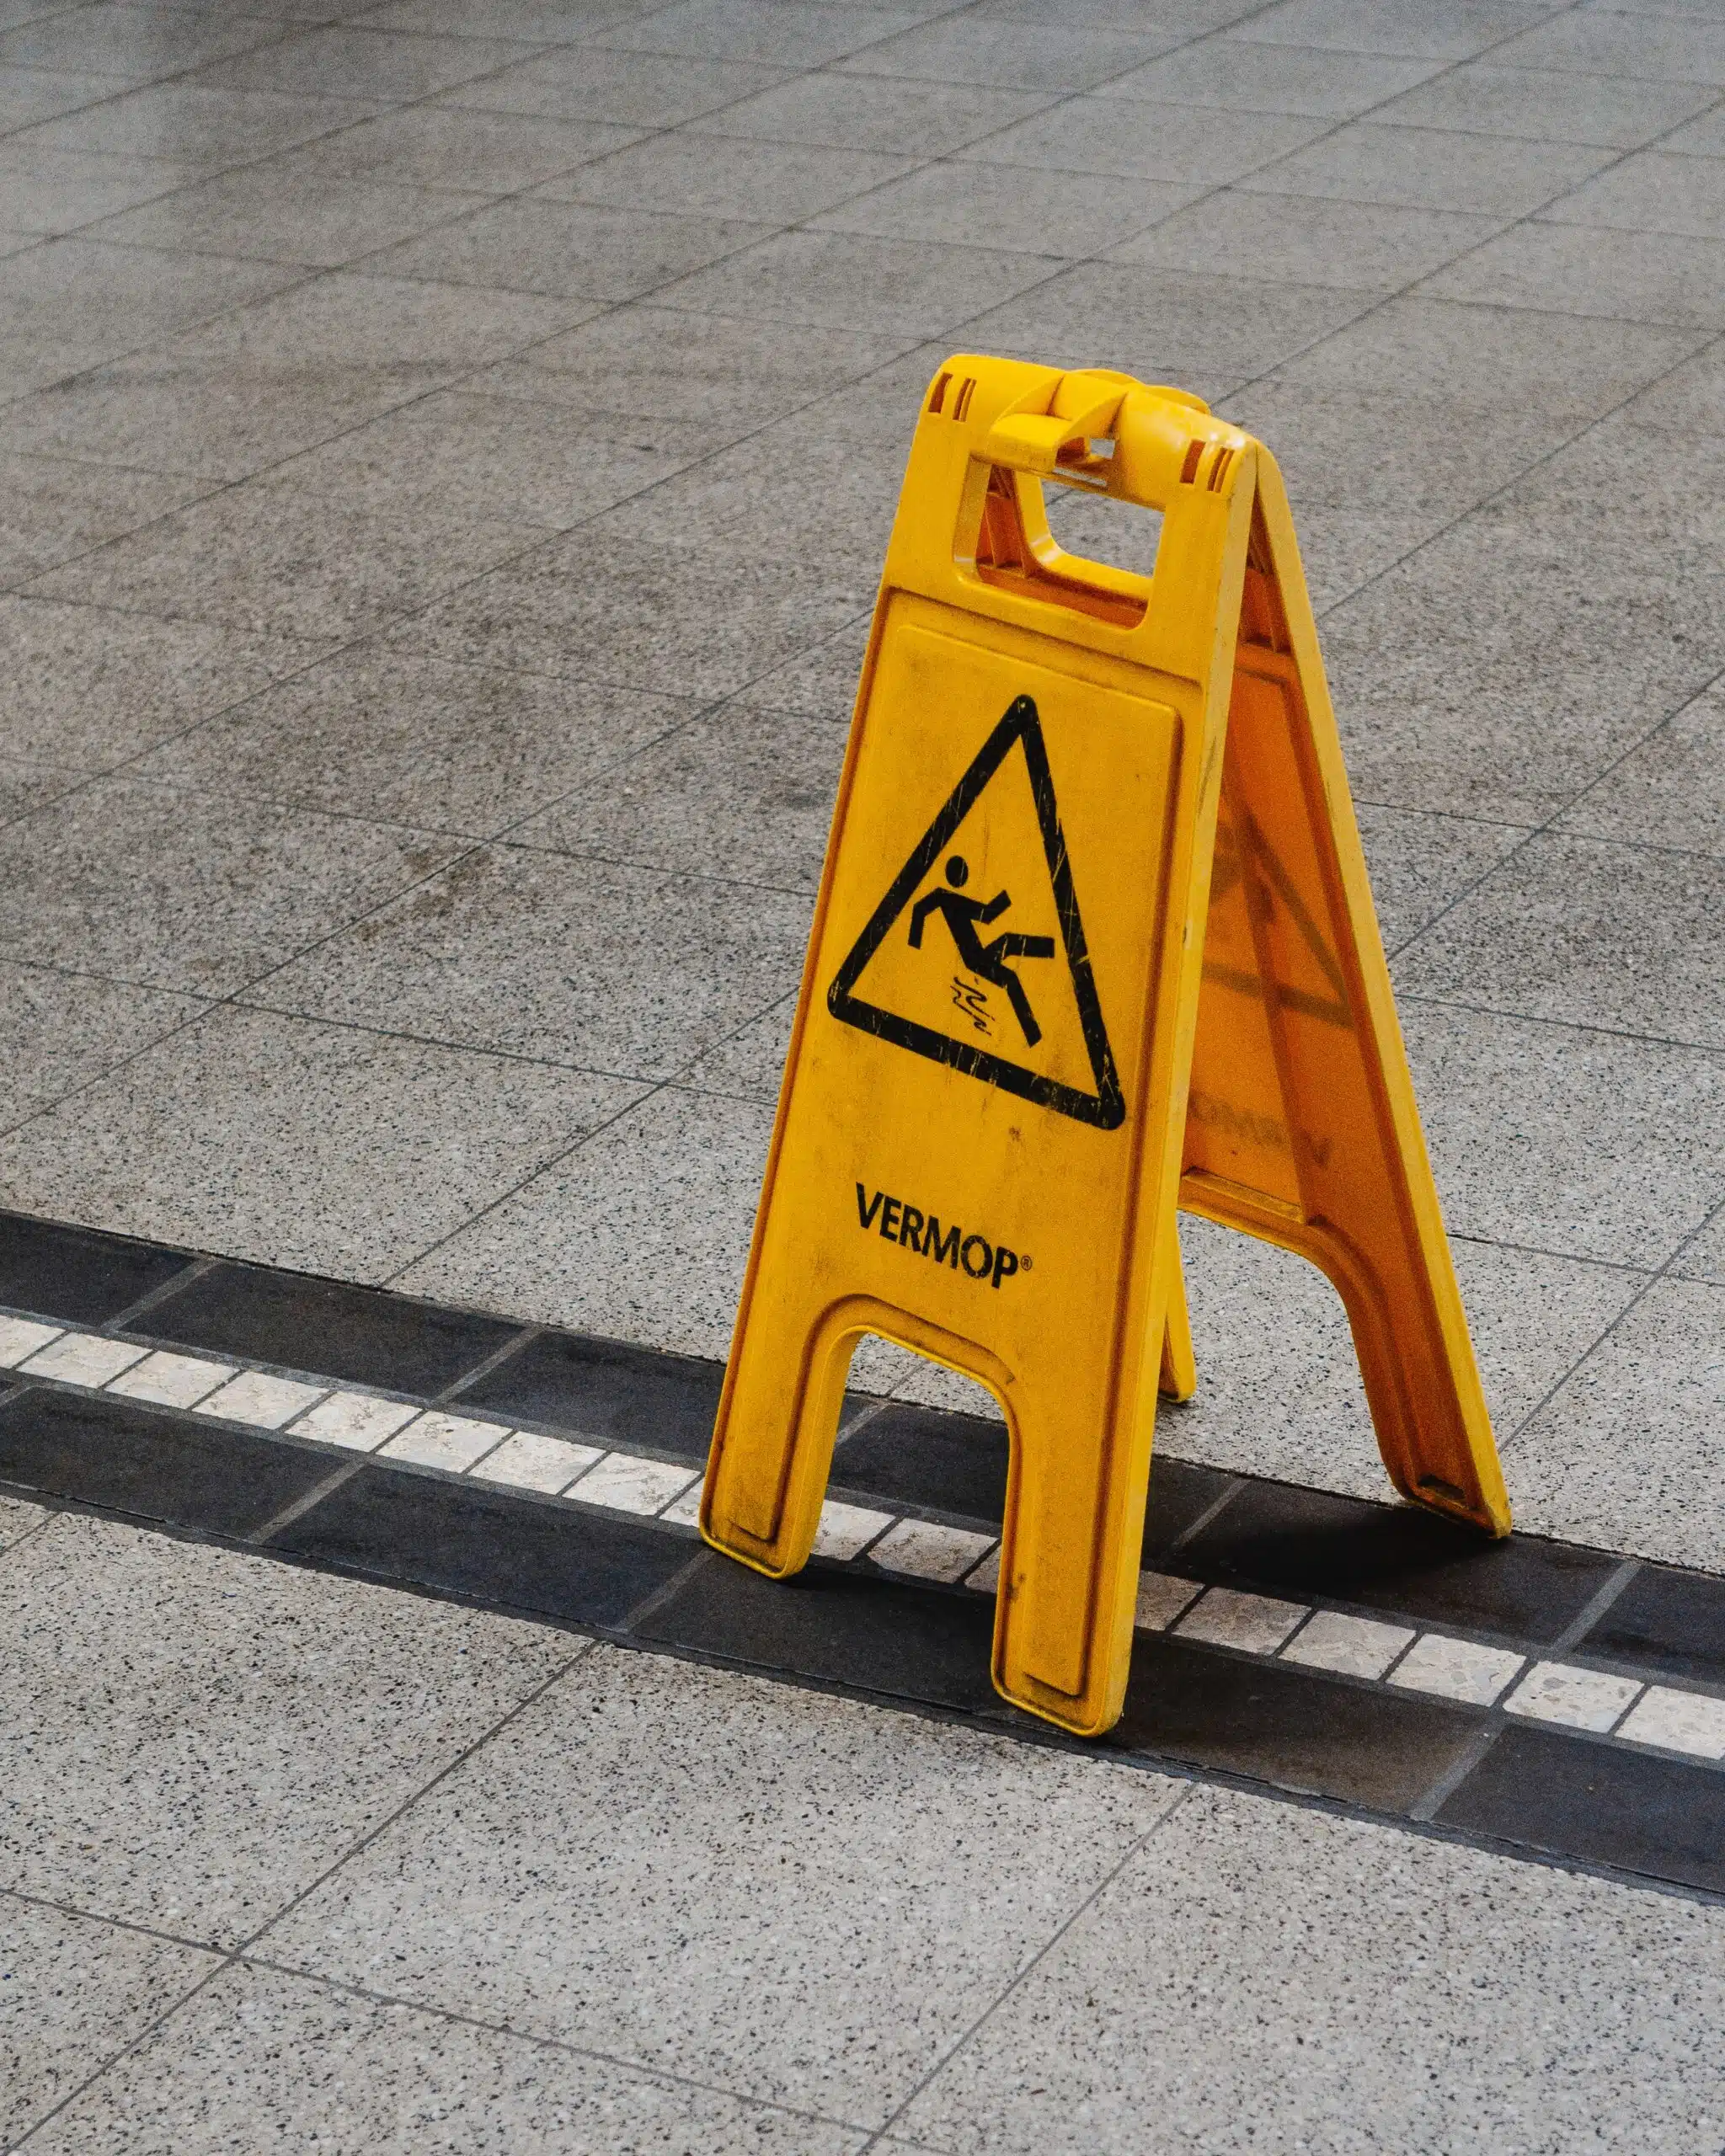 How to prevent slip and fall accidents